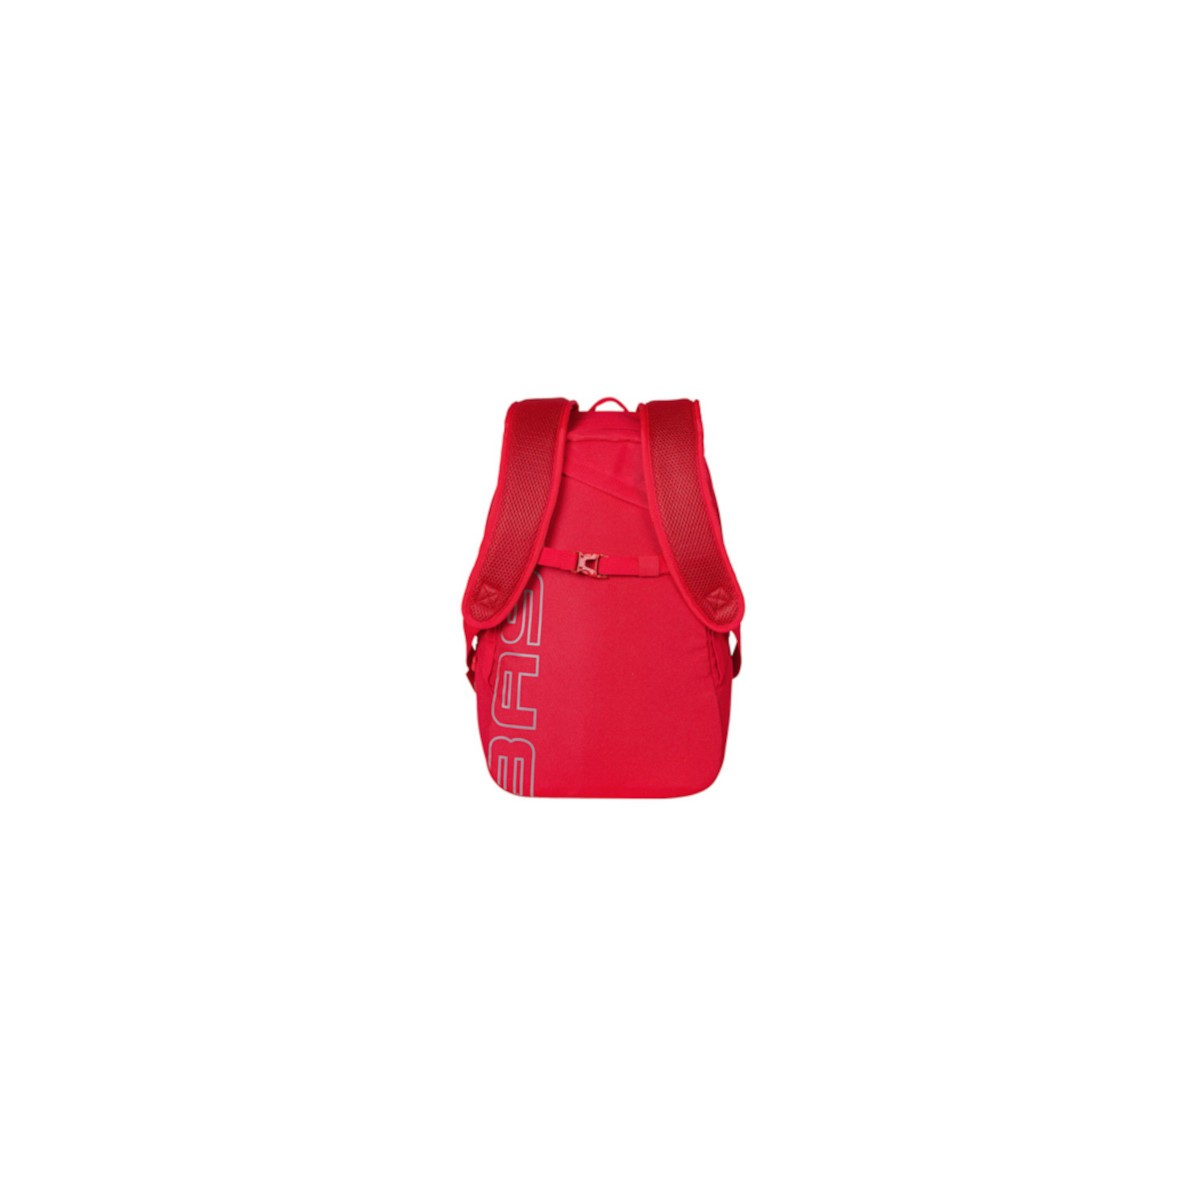 Basil SACOCHE ARRIERE LATERALE SAC A DOS FLEX BACKPACK ROUGE 17L